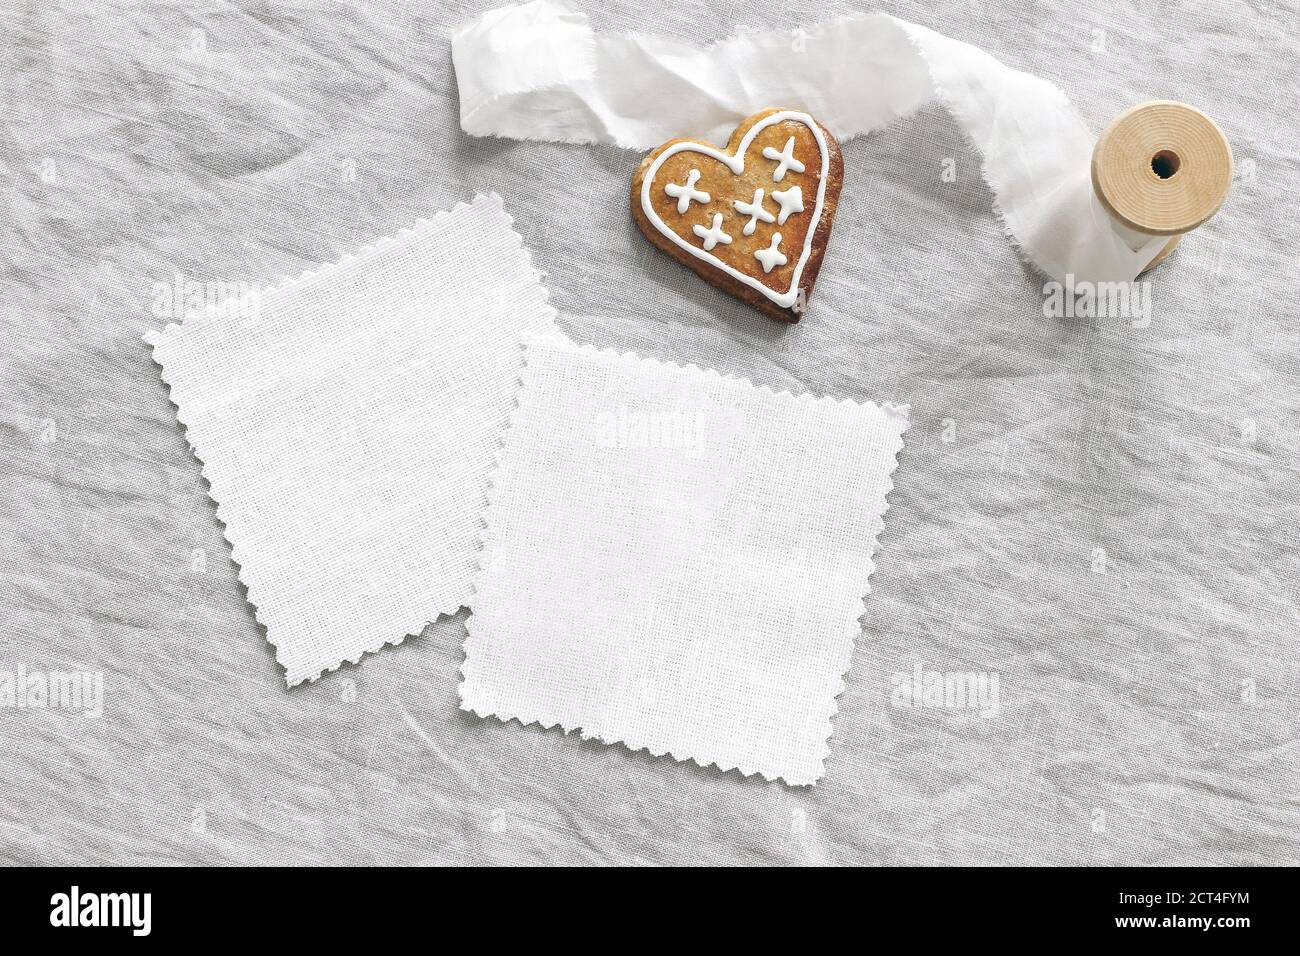 Christmas textile mockup scene. White cotton fabrics swatches on linen table cloth background. Gingerbread heart cookie, decorative sugar frosting and Stock Photo